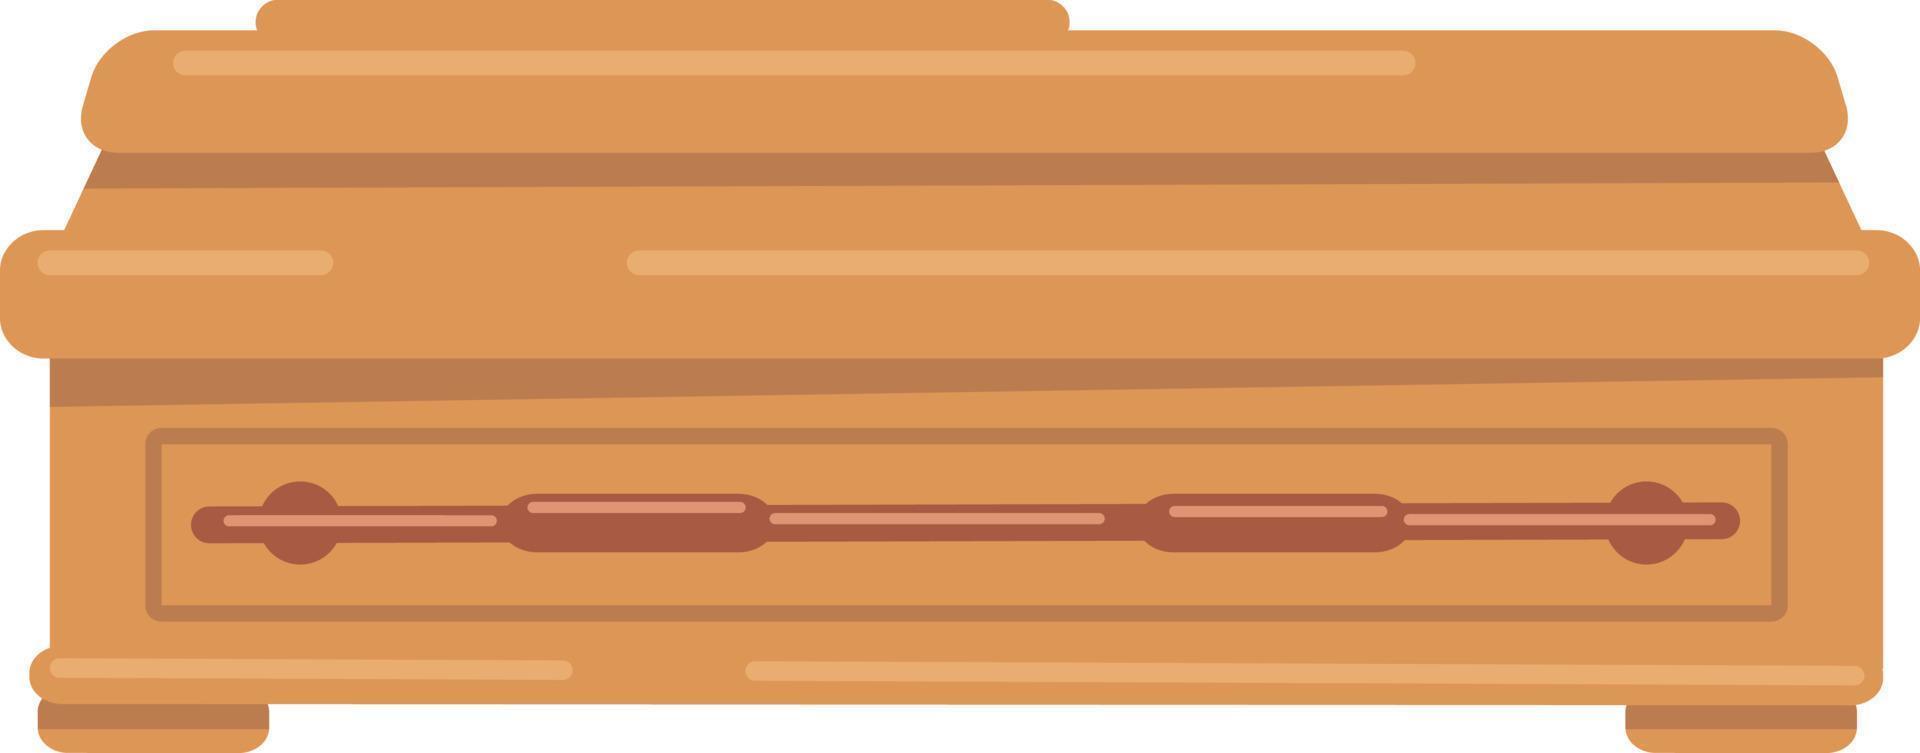 Wooden coffin semi flat color vector object